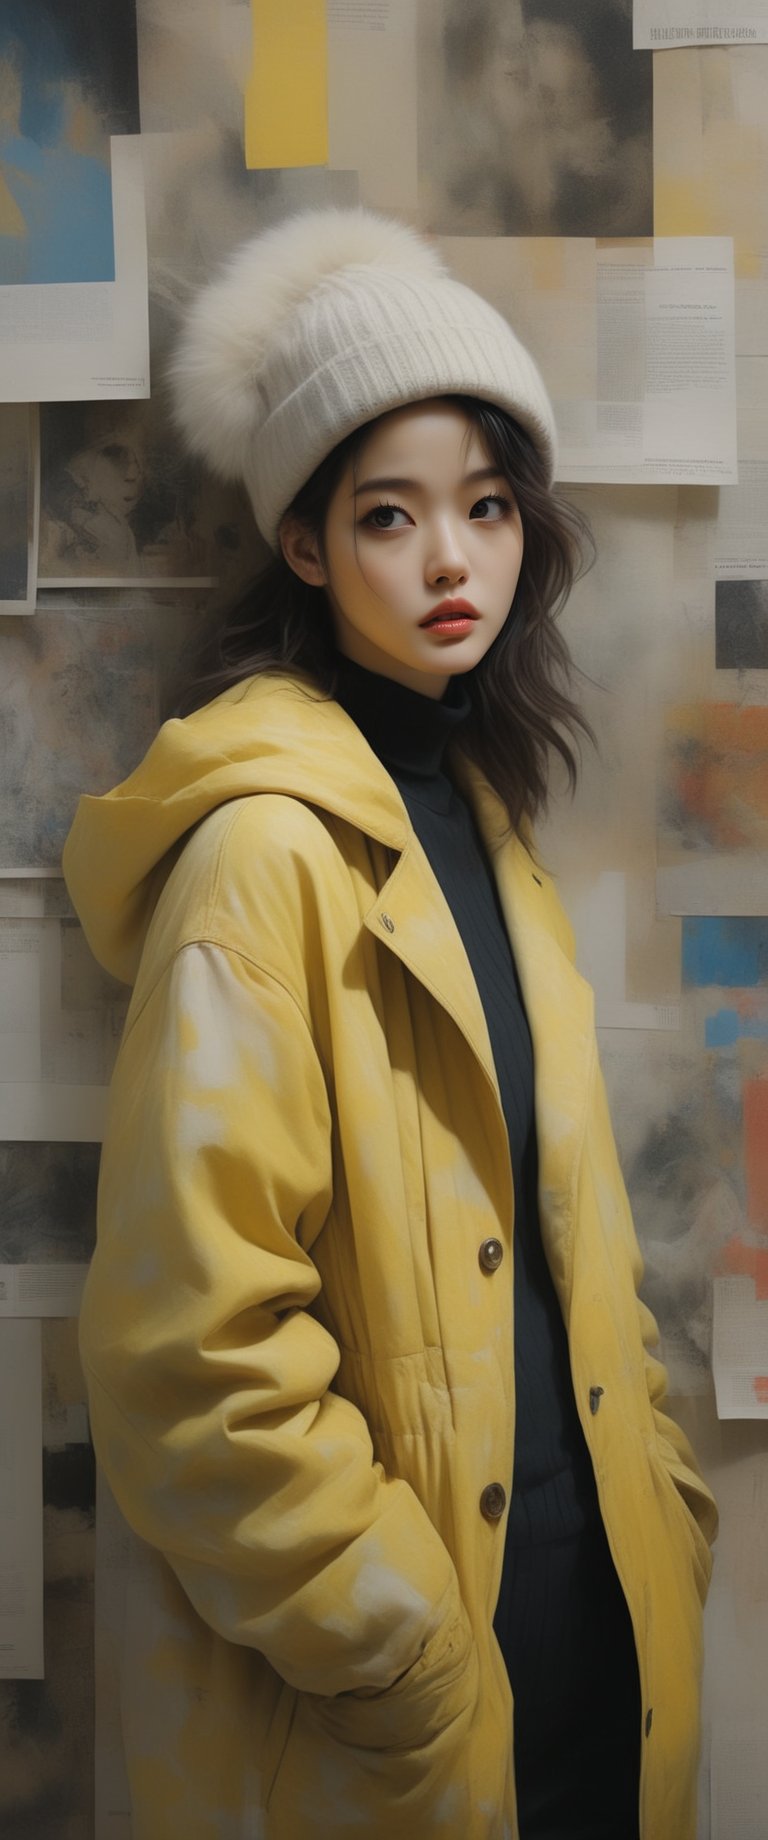 breathtaking  RAW photo of female (((masterpiece, best quality:1.4), (beautiful, aesthetic, cute, adorable:1.2), (depth of field:1.2), sexy, perfect female form, , , blue eyes, choker, closed mouth, collar, dog tail, hand in pocket, hat, hat with ears, hood, hoodie, jacket, yellow jacket, long hair, long sleeves, looking at viewer, nail polish, open clothes, open jacket, newspaper wall background,



 )), dark and moody style, perfect face, outstretched perfect hands . masterpiece, professional, award-winning, intricate details, ultra high detailed, 64k, dramatic light, volumetric light, dynamic lighting, Epic, splash art .. ), by james jean $, roby dwi antono $, ross tran $. francis bacon $, michal mraz $, adrian ghenie $, petra cortright $, gerhard richter $, takato yamamoto $, ashley wood, tense atmospheric, , , , sooyaaa,IMGFIX,Comic Book-Style,Movie Aesthetic,action shot,photo r3al,bad quality image,oil painting, cinematic moviemaker style,Japan Vibes,H effect,koh_yunjung ,koh_yunjung,kwon-nara,sooyaaa,colorful,bones,skulls,armor,han-hyoju-xl
,DonMn1ghtm4reXL, ct-fujiii,ct-jeniiii,more detail XL, ct-eujiiin, ct-goeuun